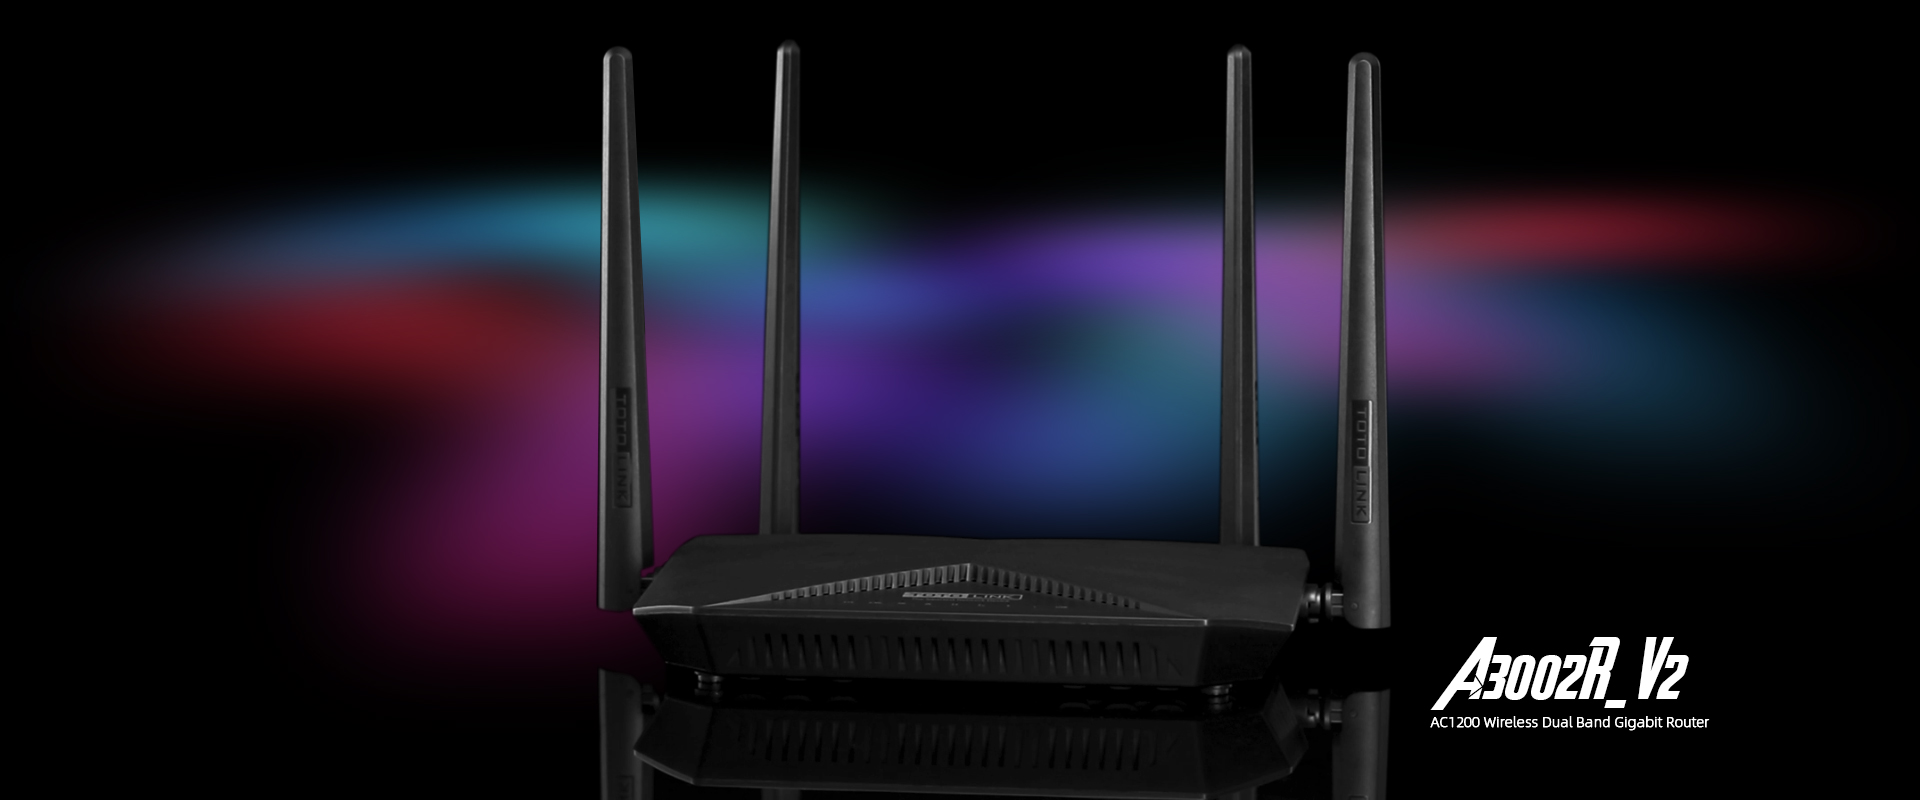 A3002R V2 AC1200 Wireless Dual Band Router